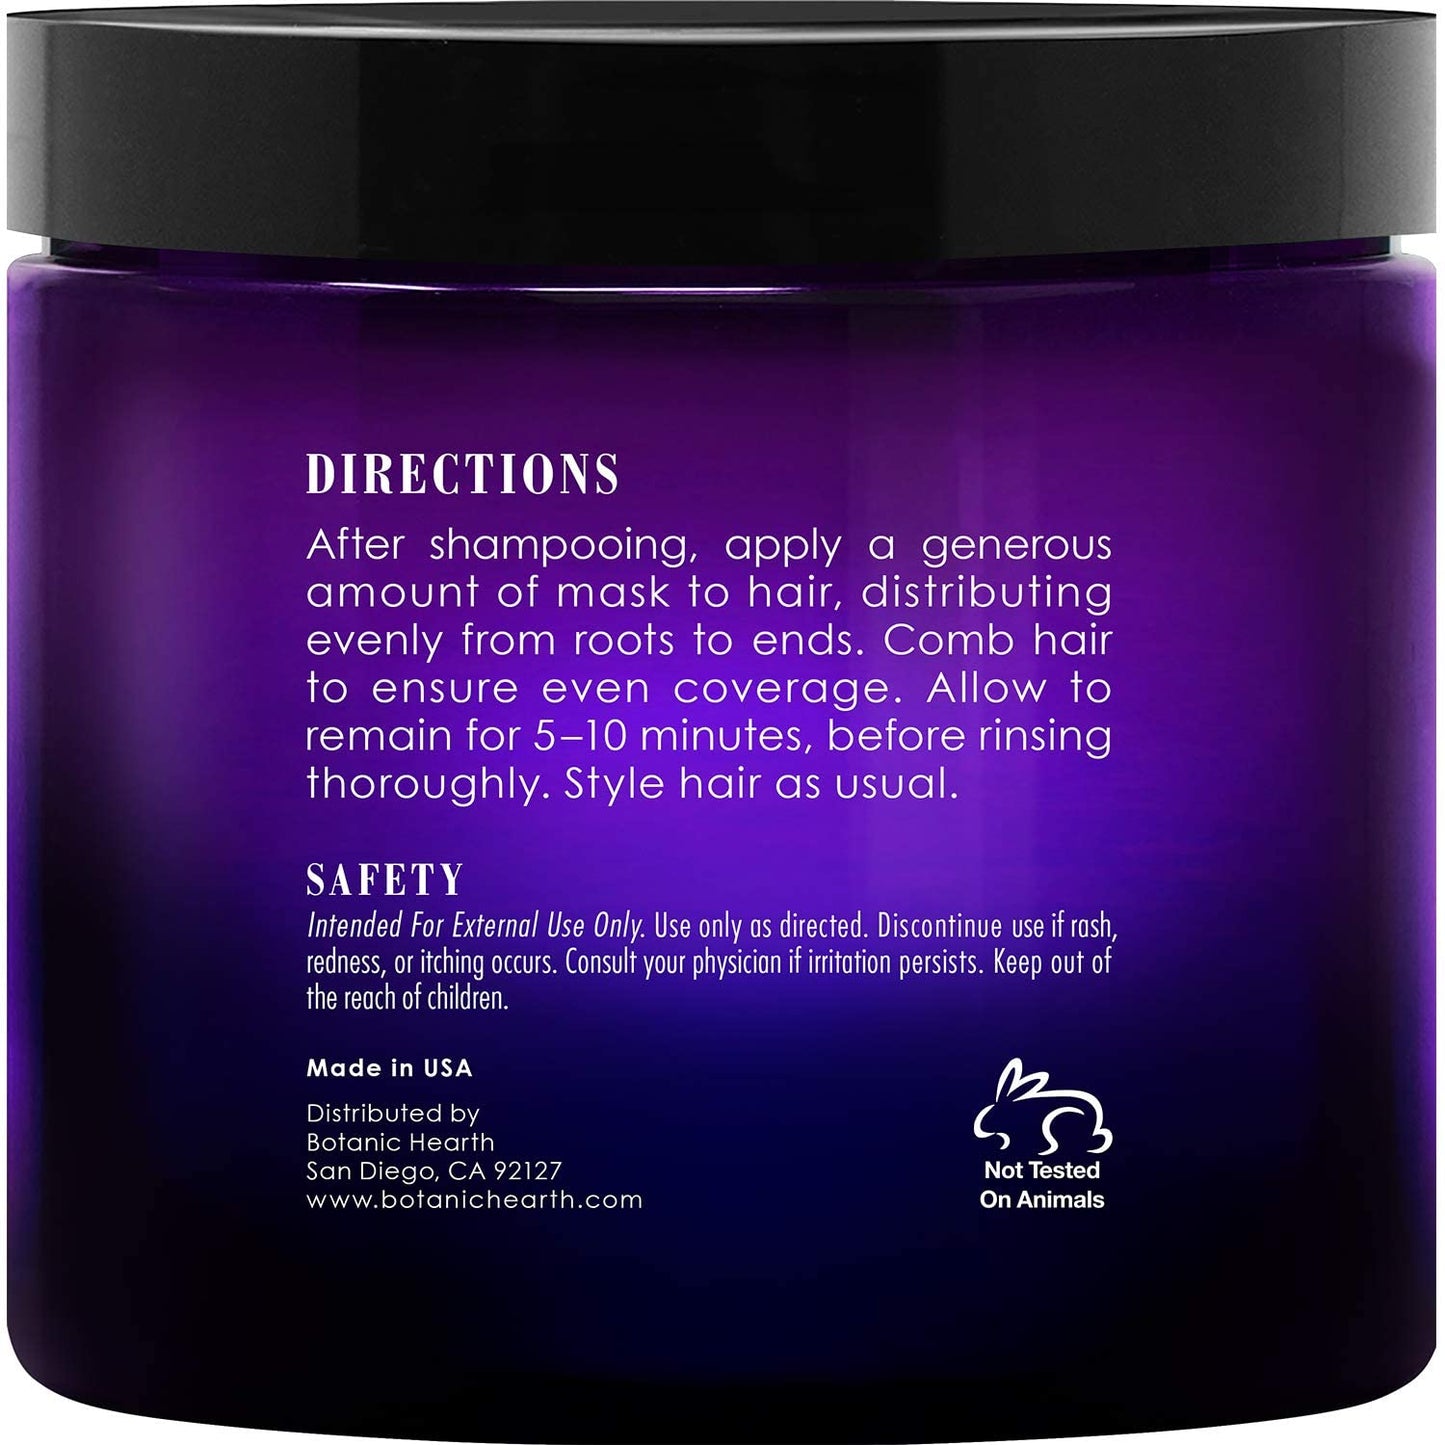 Botanic Hearth Purple Hair Mask - for Blonde, Silver and Gray Hair, Sulfate & Paraben Free - 8 fl oz